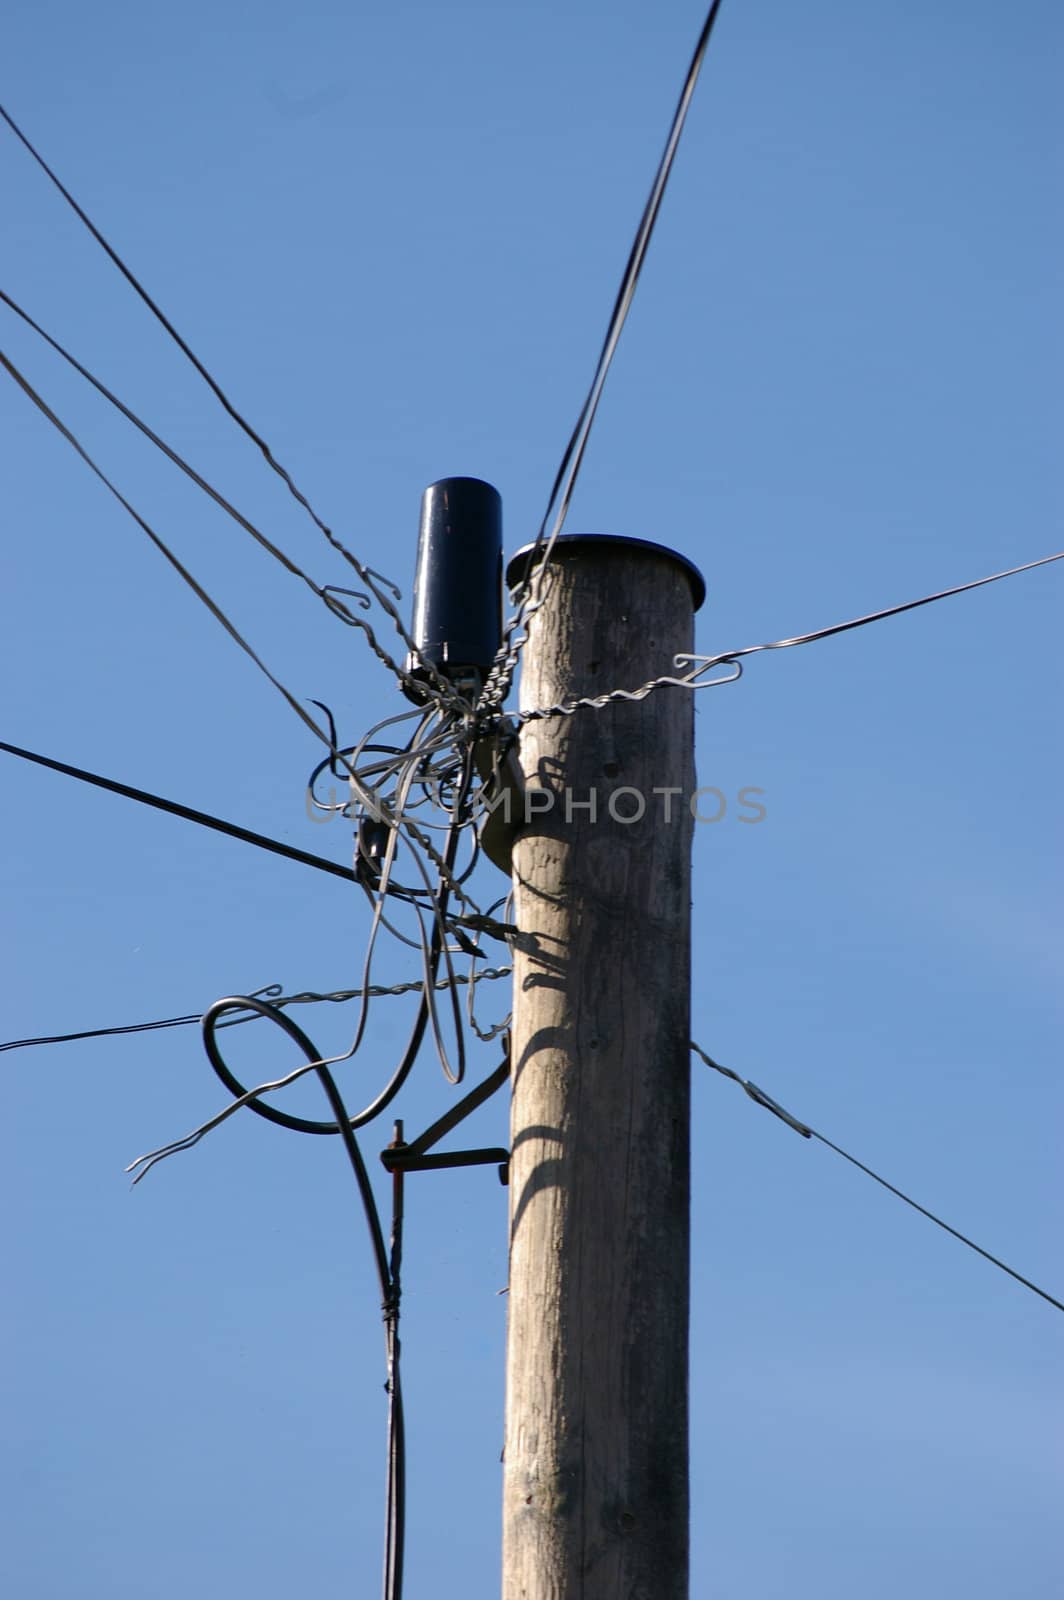 The top of a phone pole with a mess of wires going in different directions.